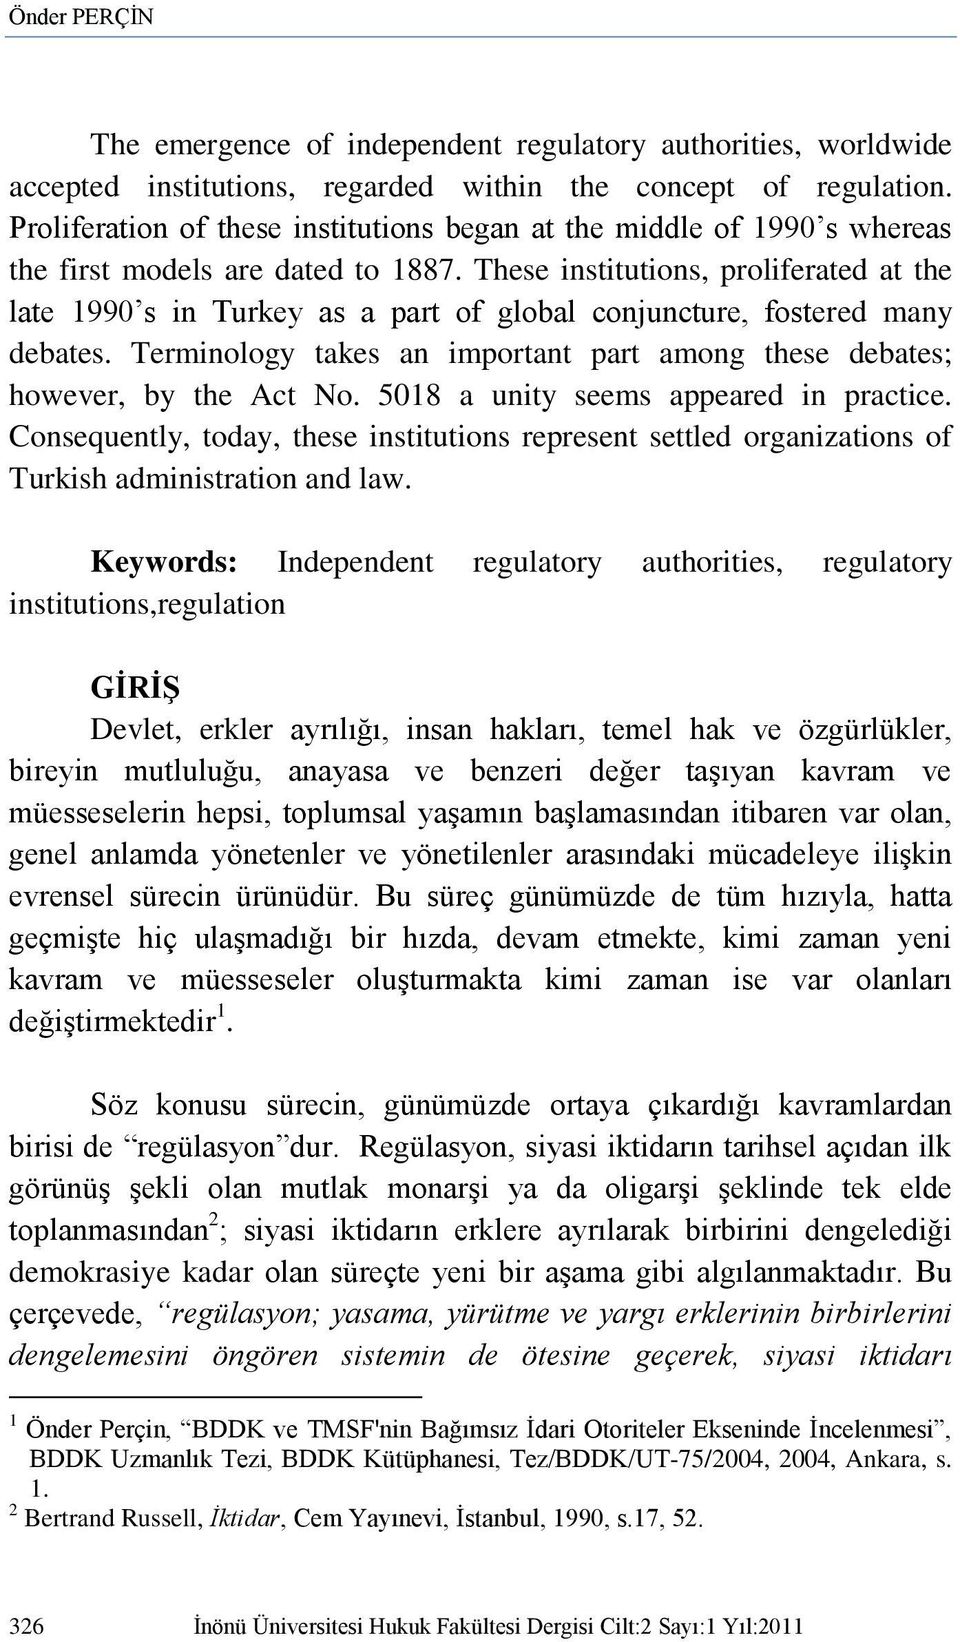 These institutions, proliferated at the late 1990 s in Turkey as a part of global conjuncture, fostered many debates. Terminology takes an important part among these debates; however, by the Act No.